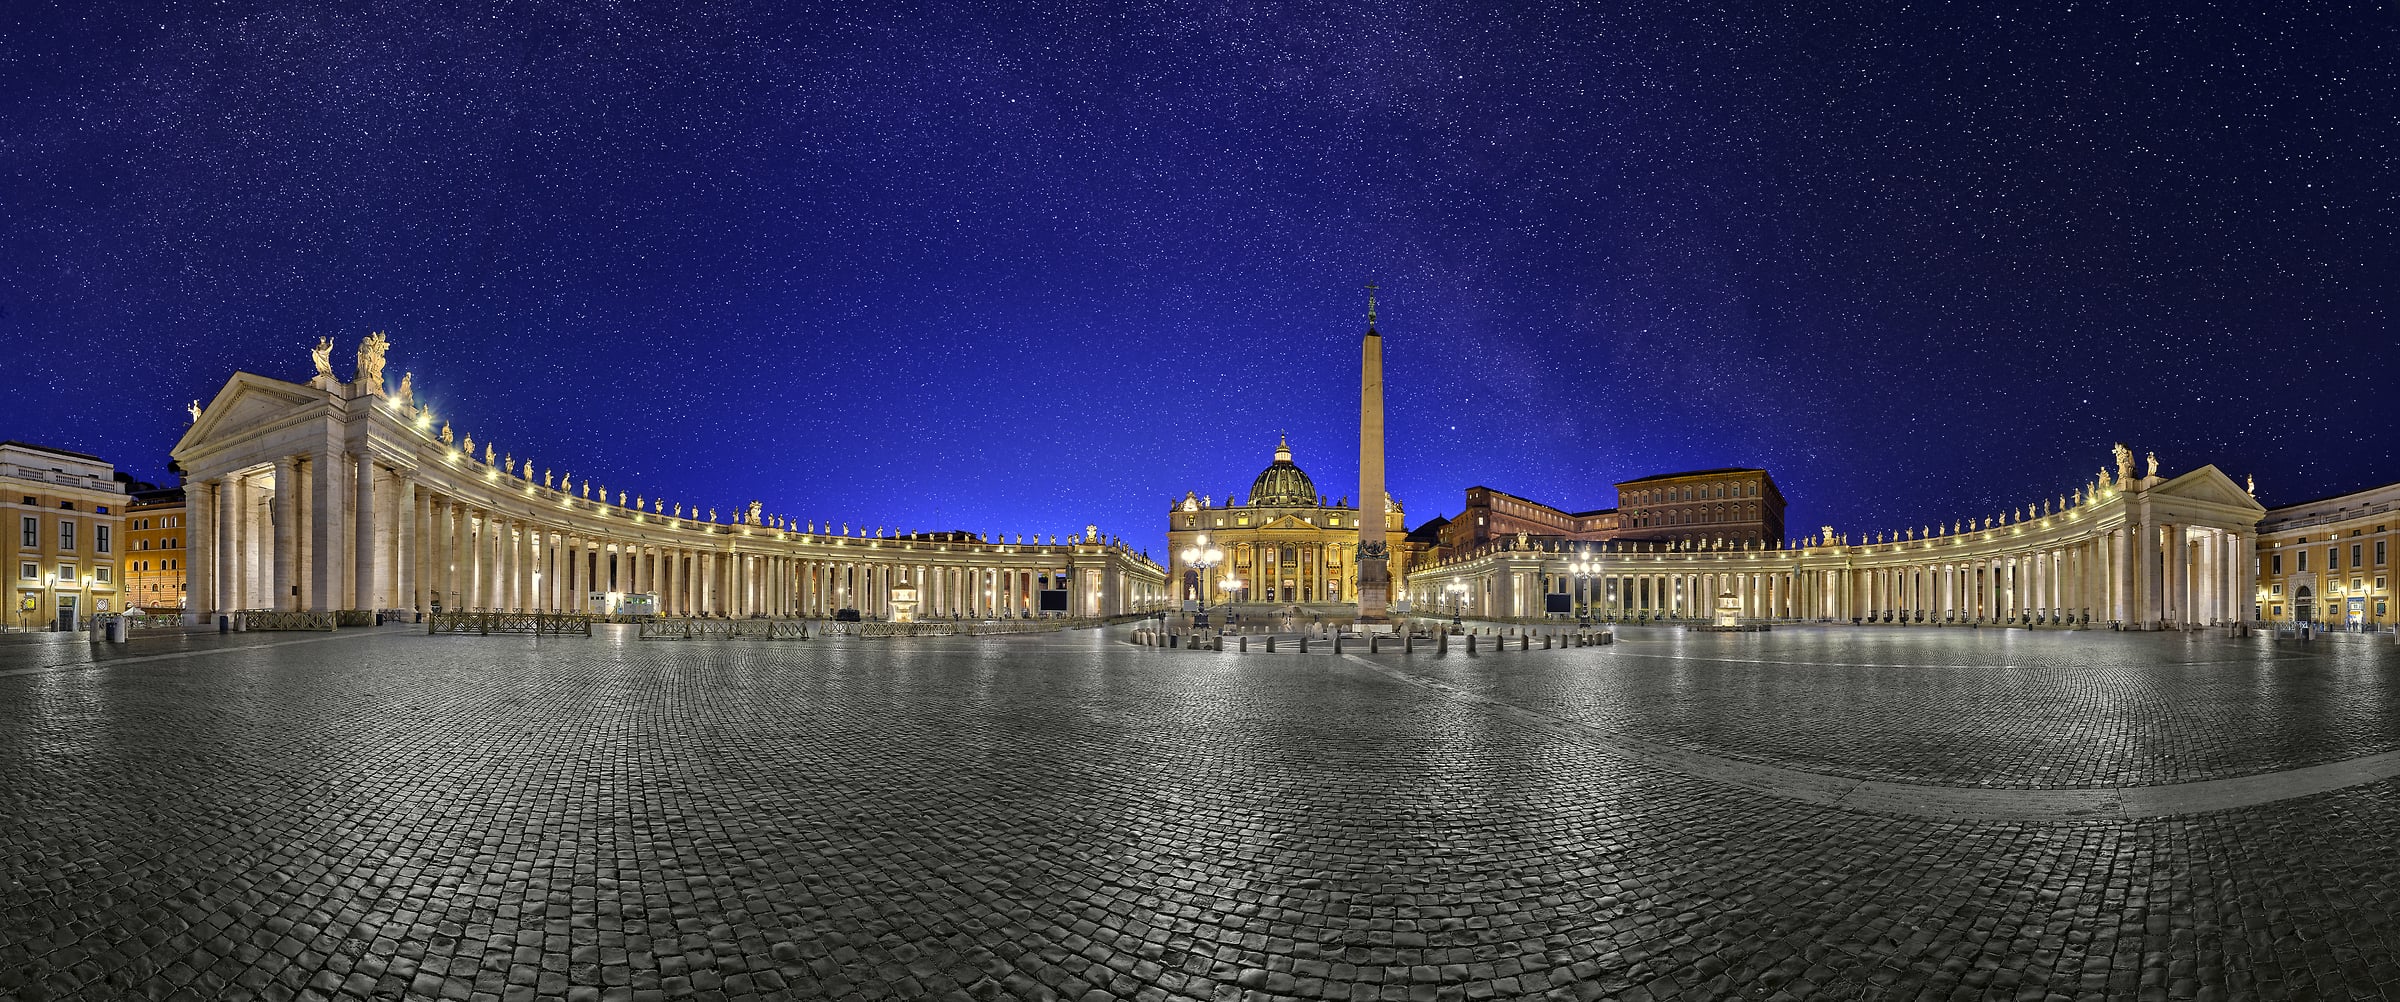 360 megapixels! A very high resolution, large-format VAST photo print of Saint Peter's Square; photograph created by David Meaux in Vatican City, the Holy See